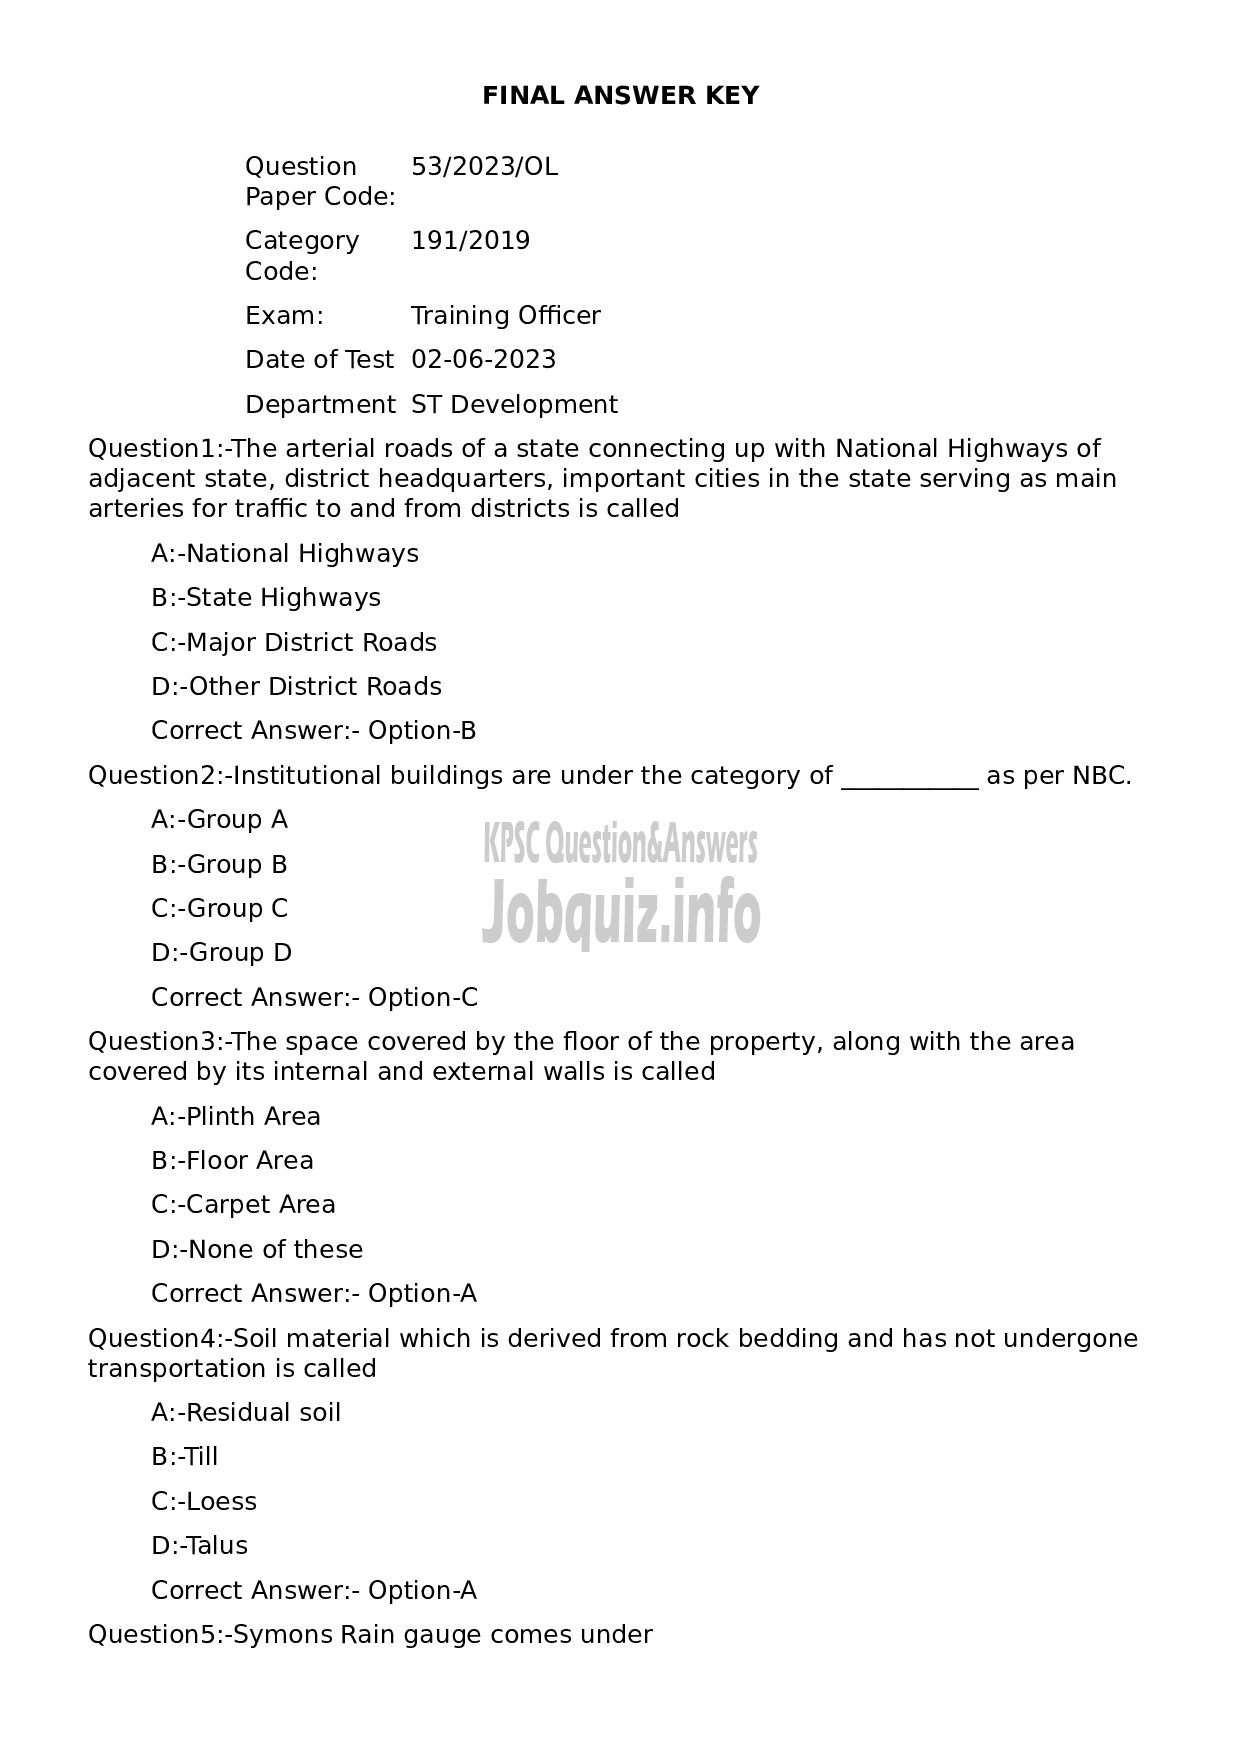 Kerala PSC Question Paper - Training Officer-1